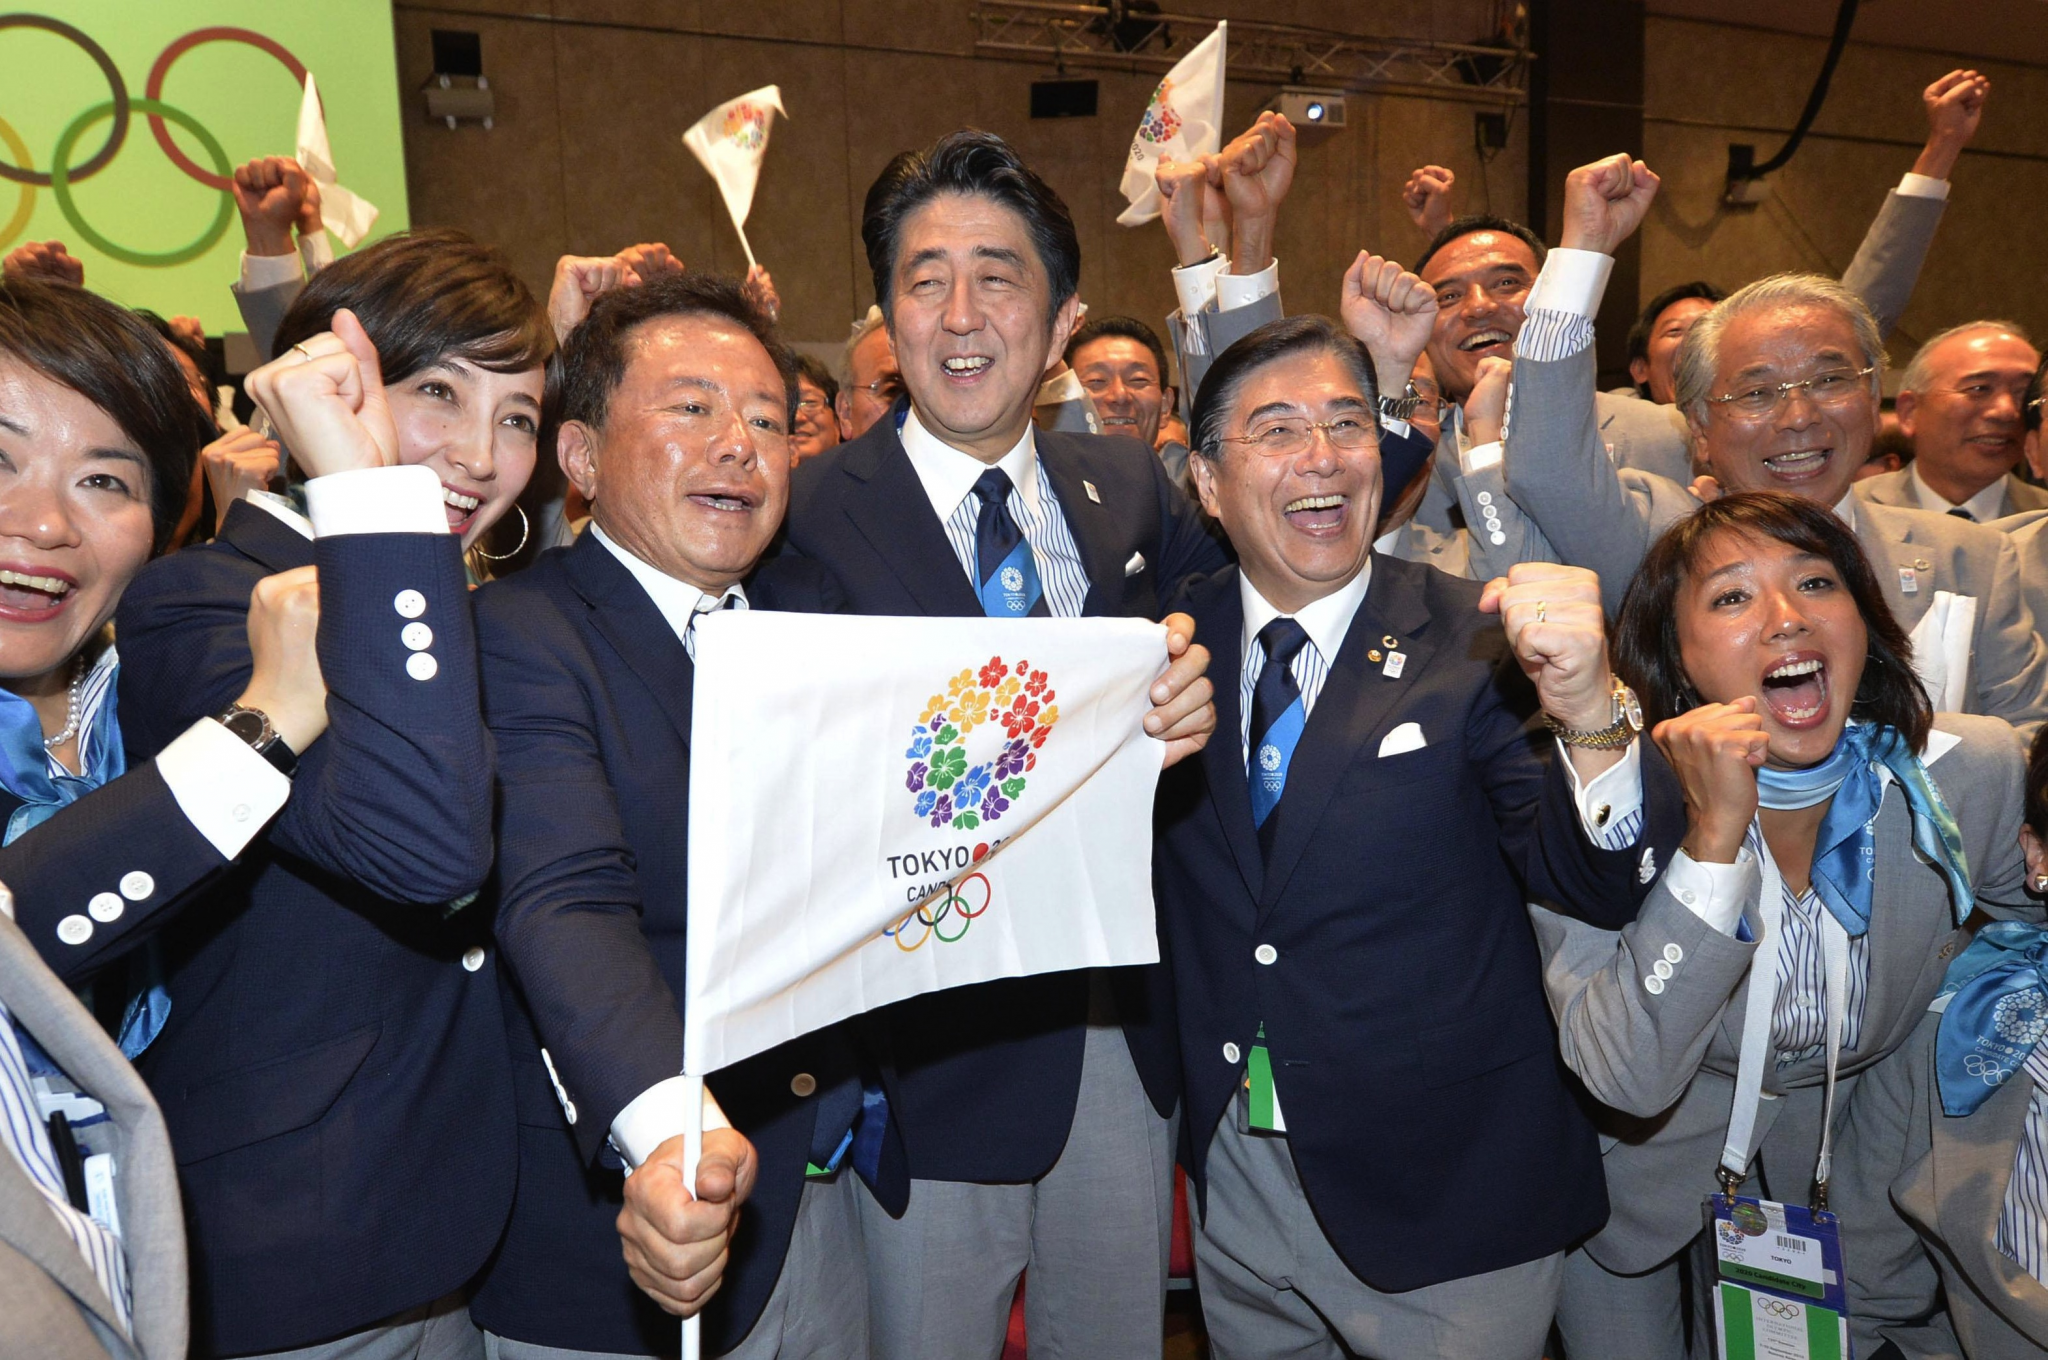 Tokyo being awarded the 2020 Olympic and Paralympic Games ahead of rivals Istanbul and Madrid was part of a trio of three significant decisions taken at the 2013 IOC Session in Buenos Aires ©Getty Images